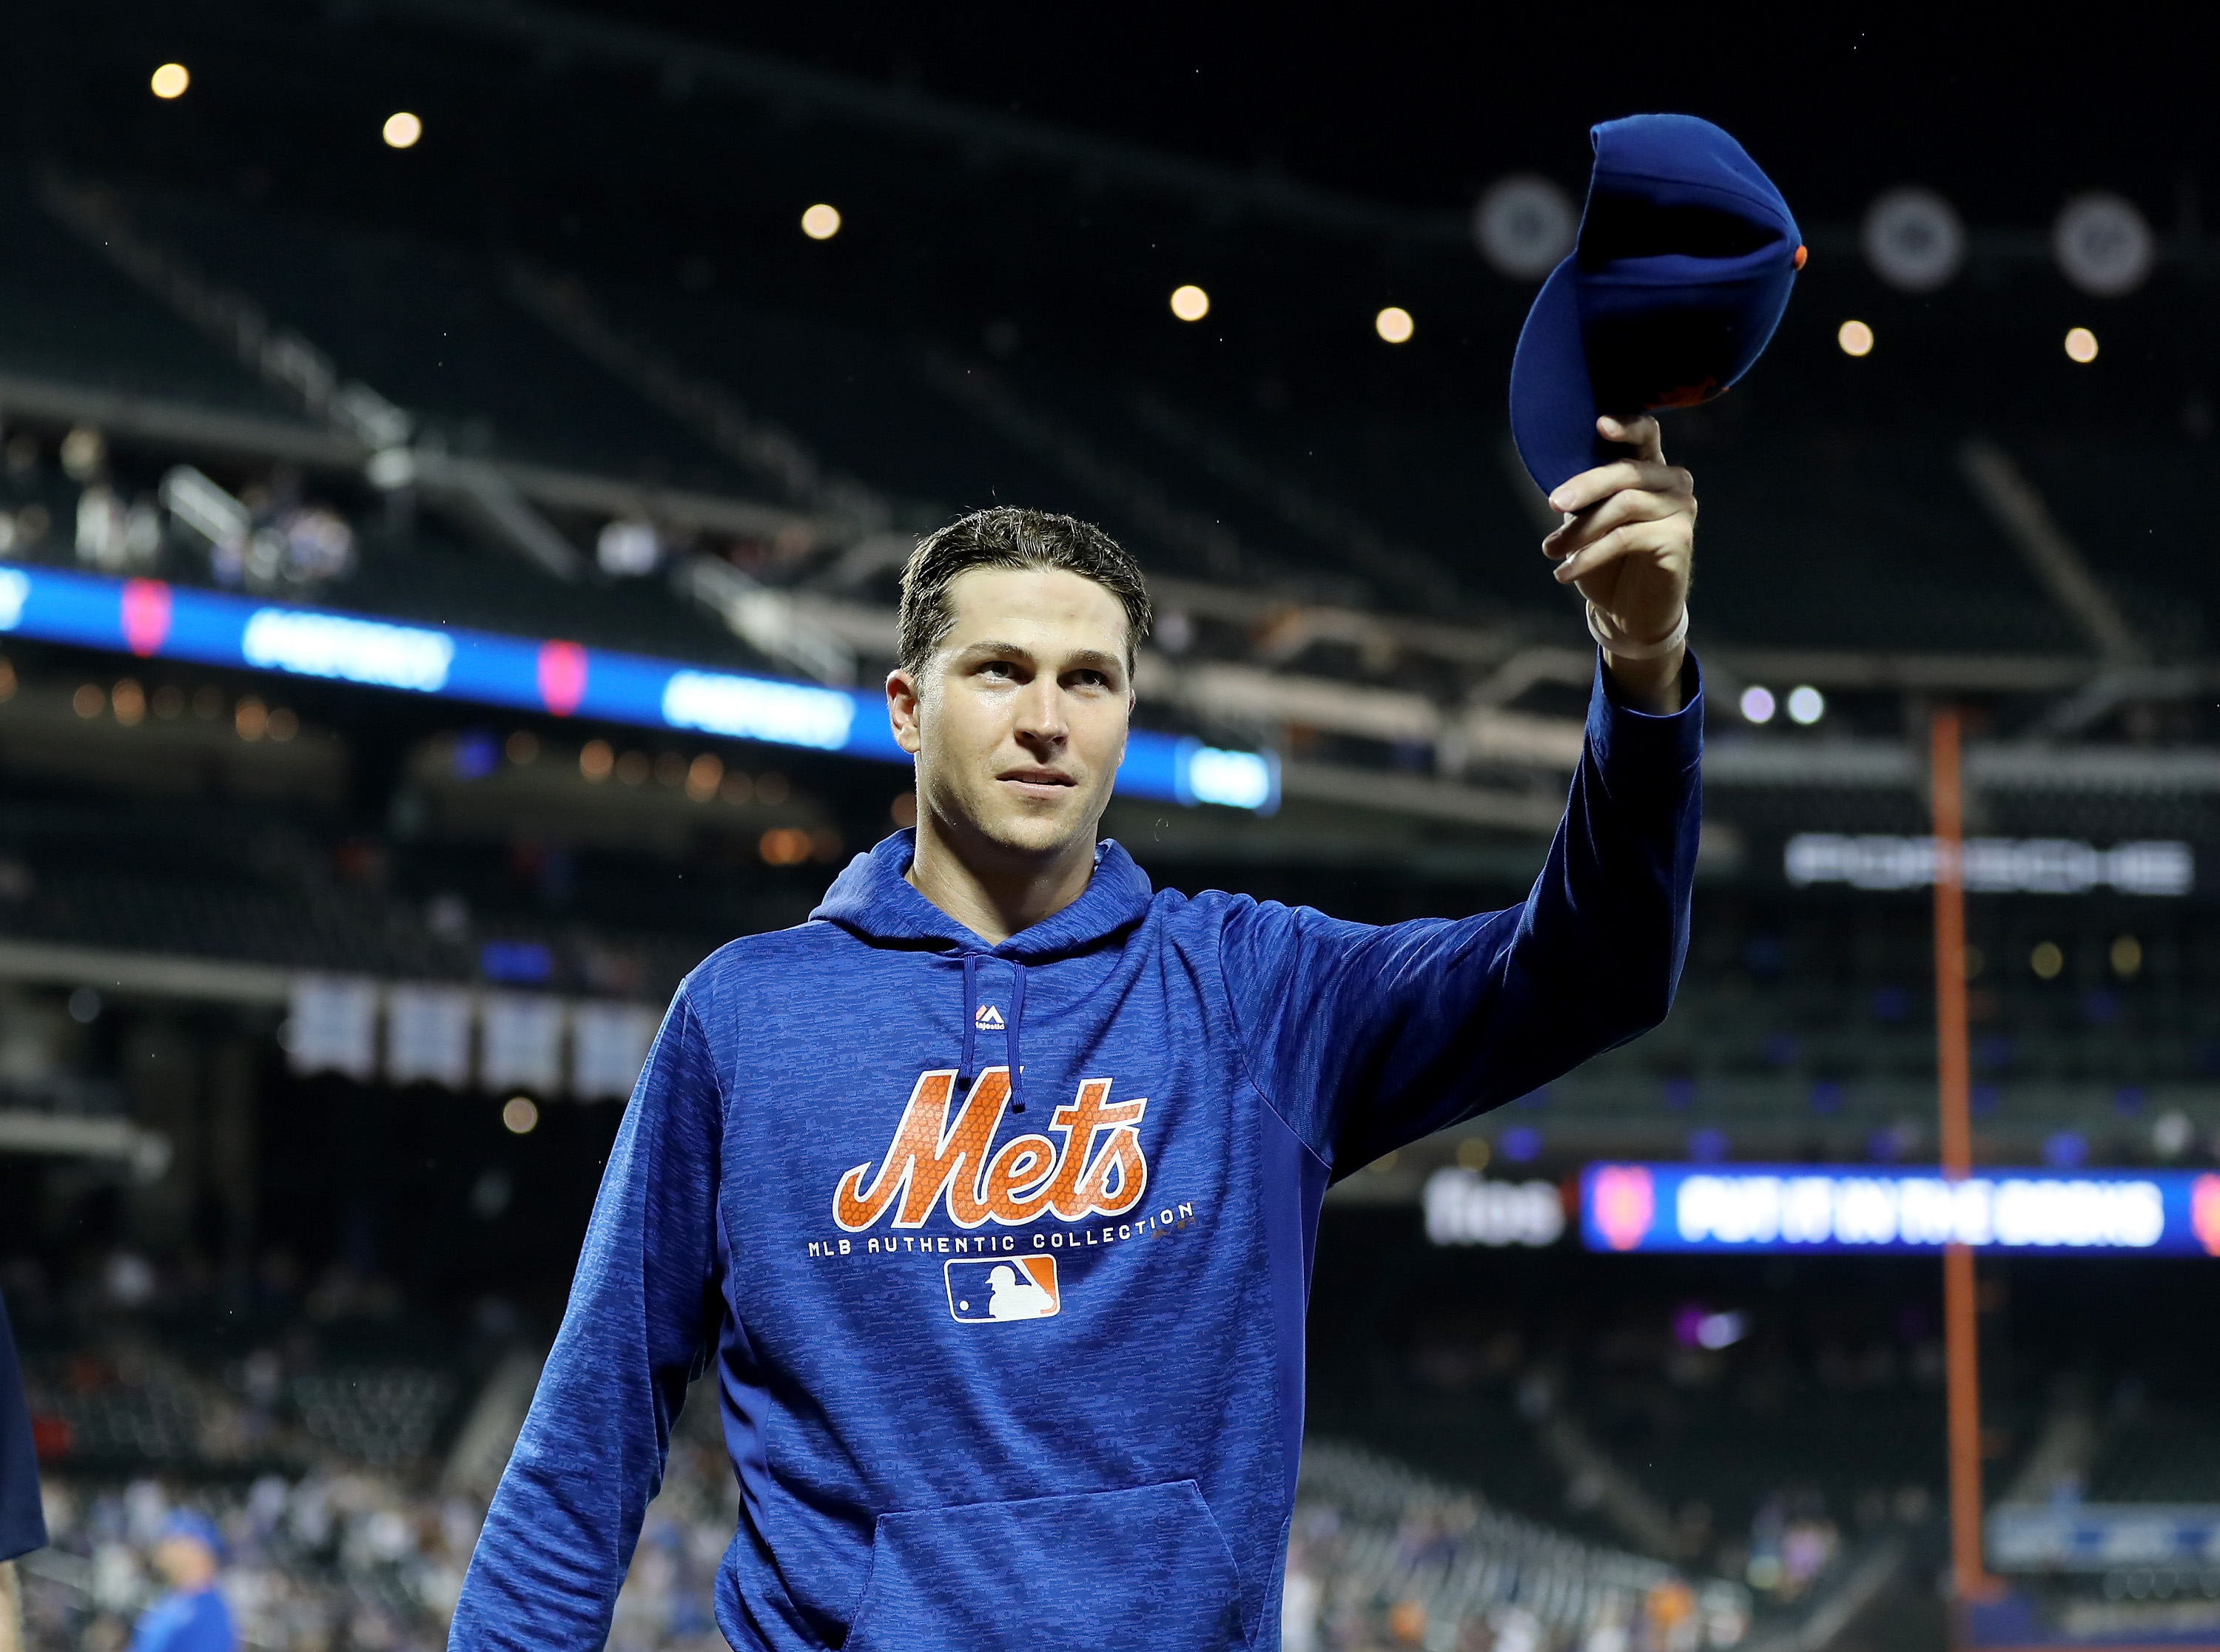 Jacob deGrom #48 of the New York Mets salutes the fans after the 3-0 win over the Atlanta Braves on September 26,2018 at Citi Field in the Flushing neighborhood of the Queens borough of New York City. (Elsa&mdash;Getty Images)